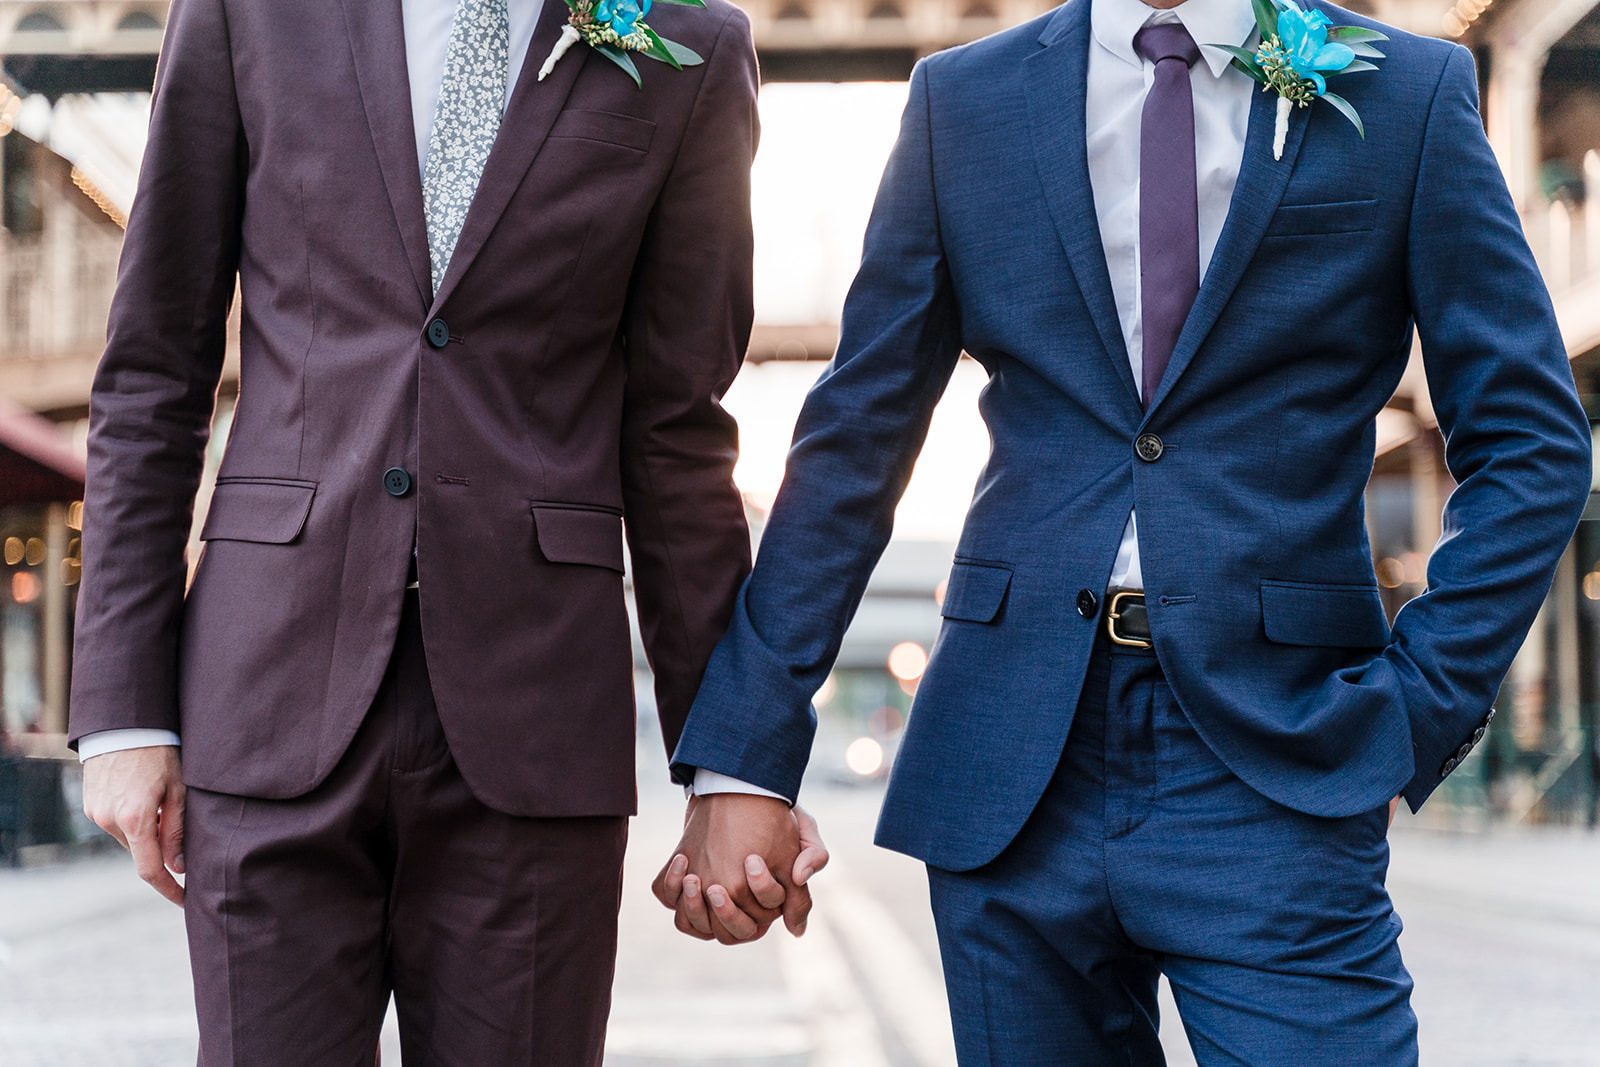 Two grooms hold hands, one wearing a stylish blue suit and the other in a dashing purple suit, symbolizing their unique personalities and shared love.